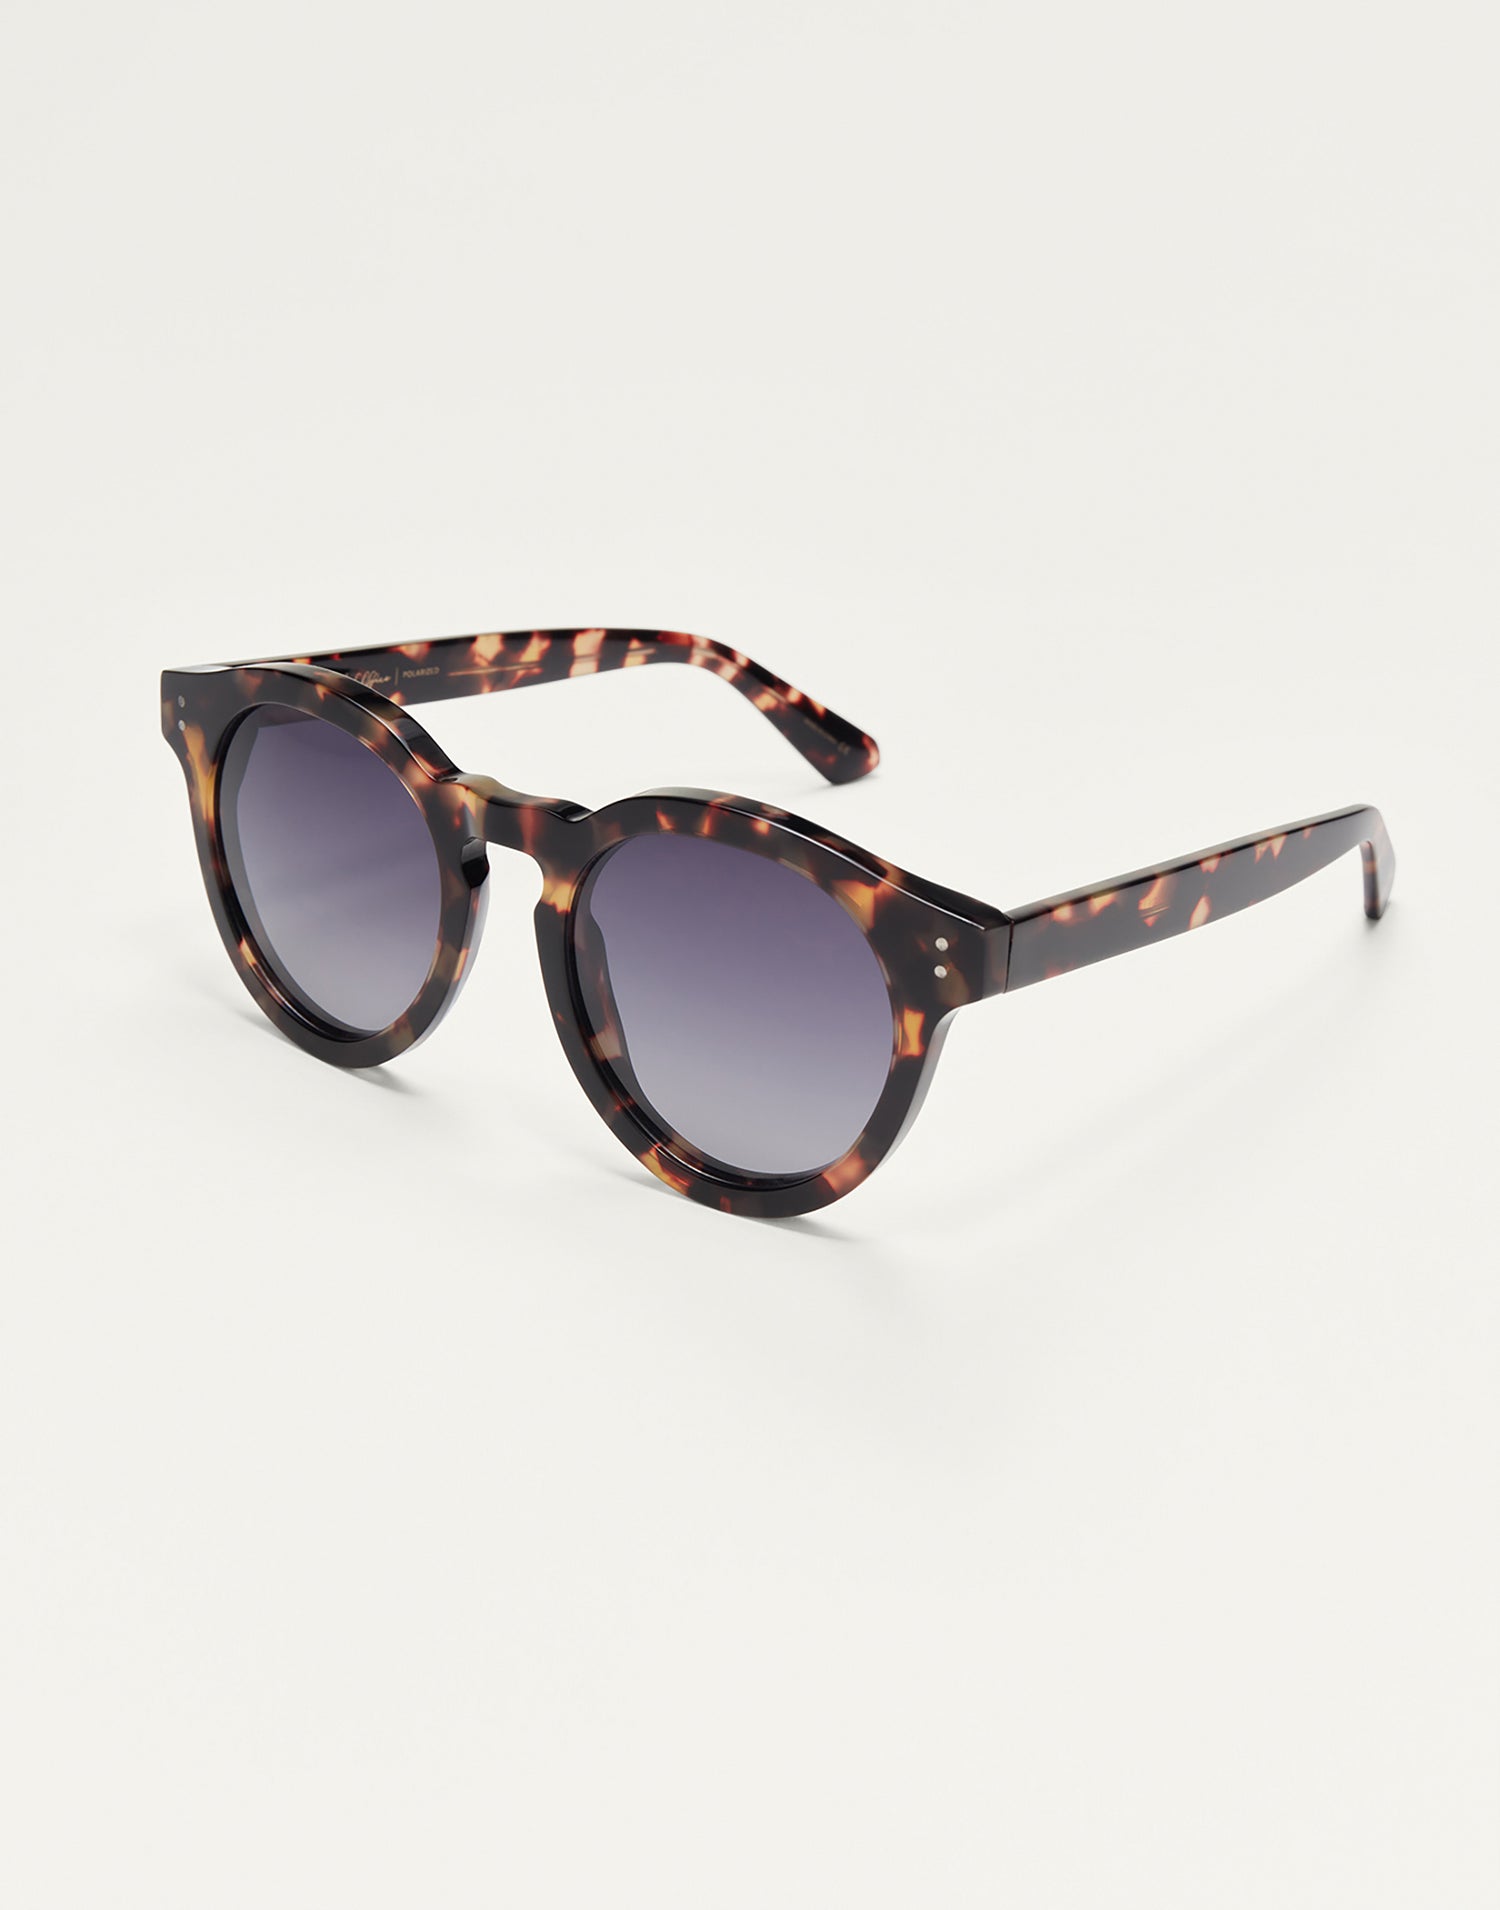 Out of Office Sunglasses by Z Supply in Brown Tortoise - Angled View